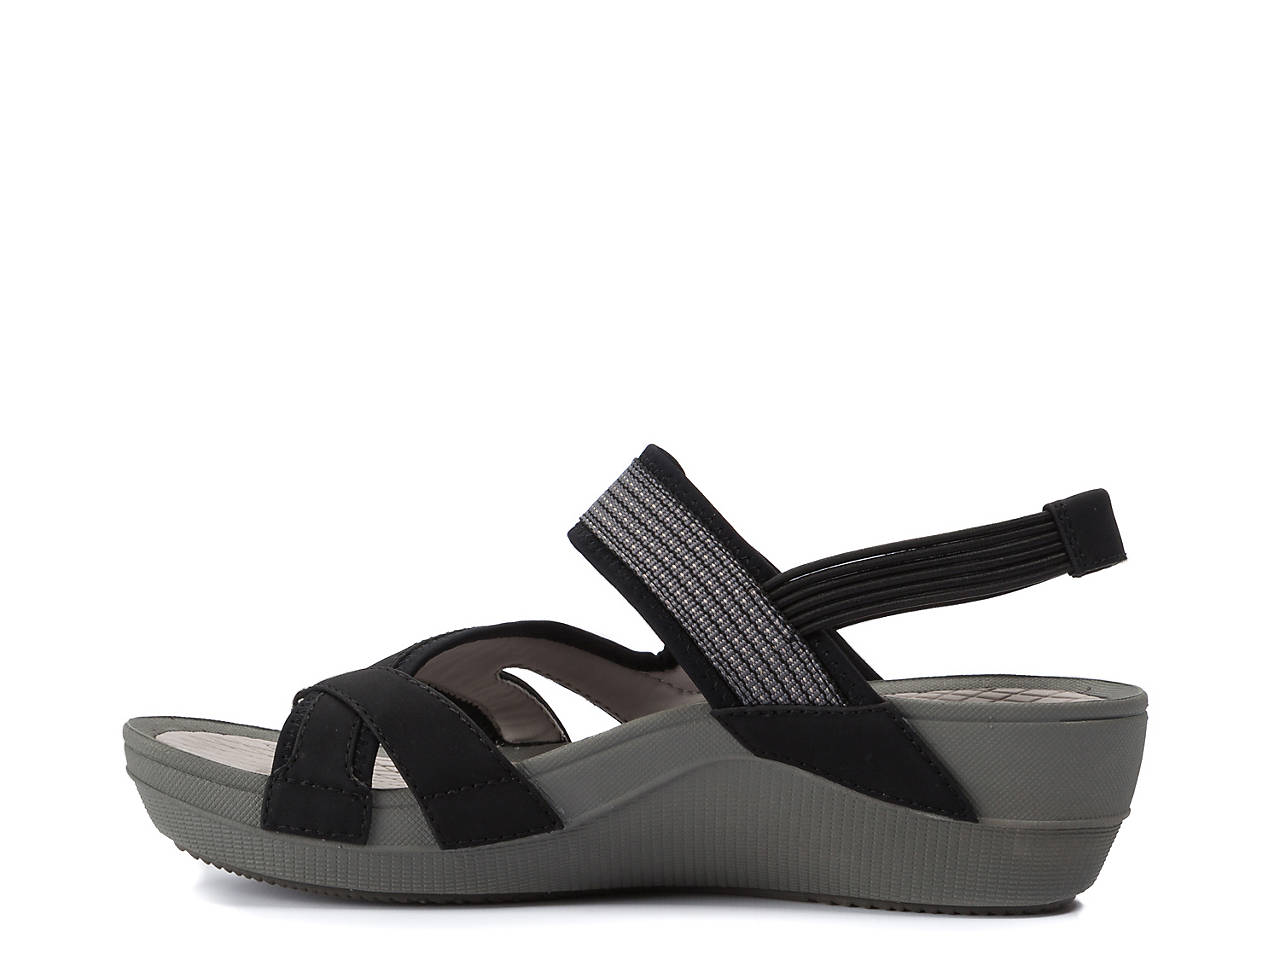 Bare Traps Brinley Wedge Sandal Women's Shoes | DSW